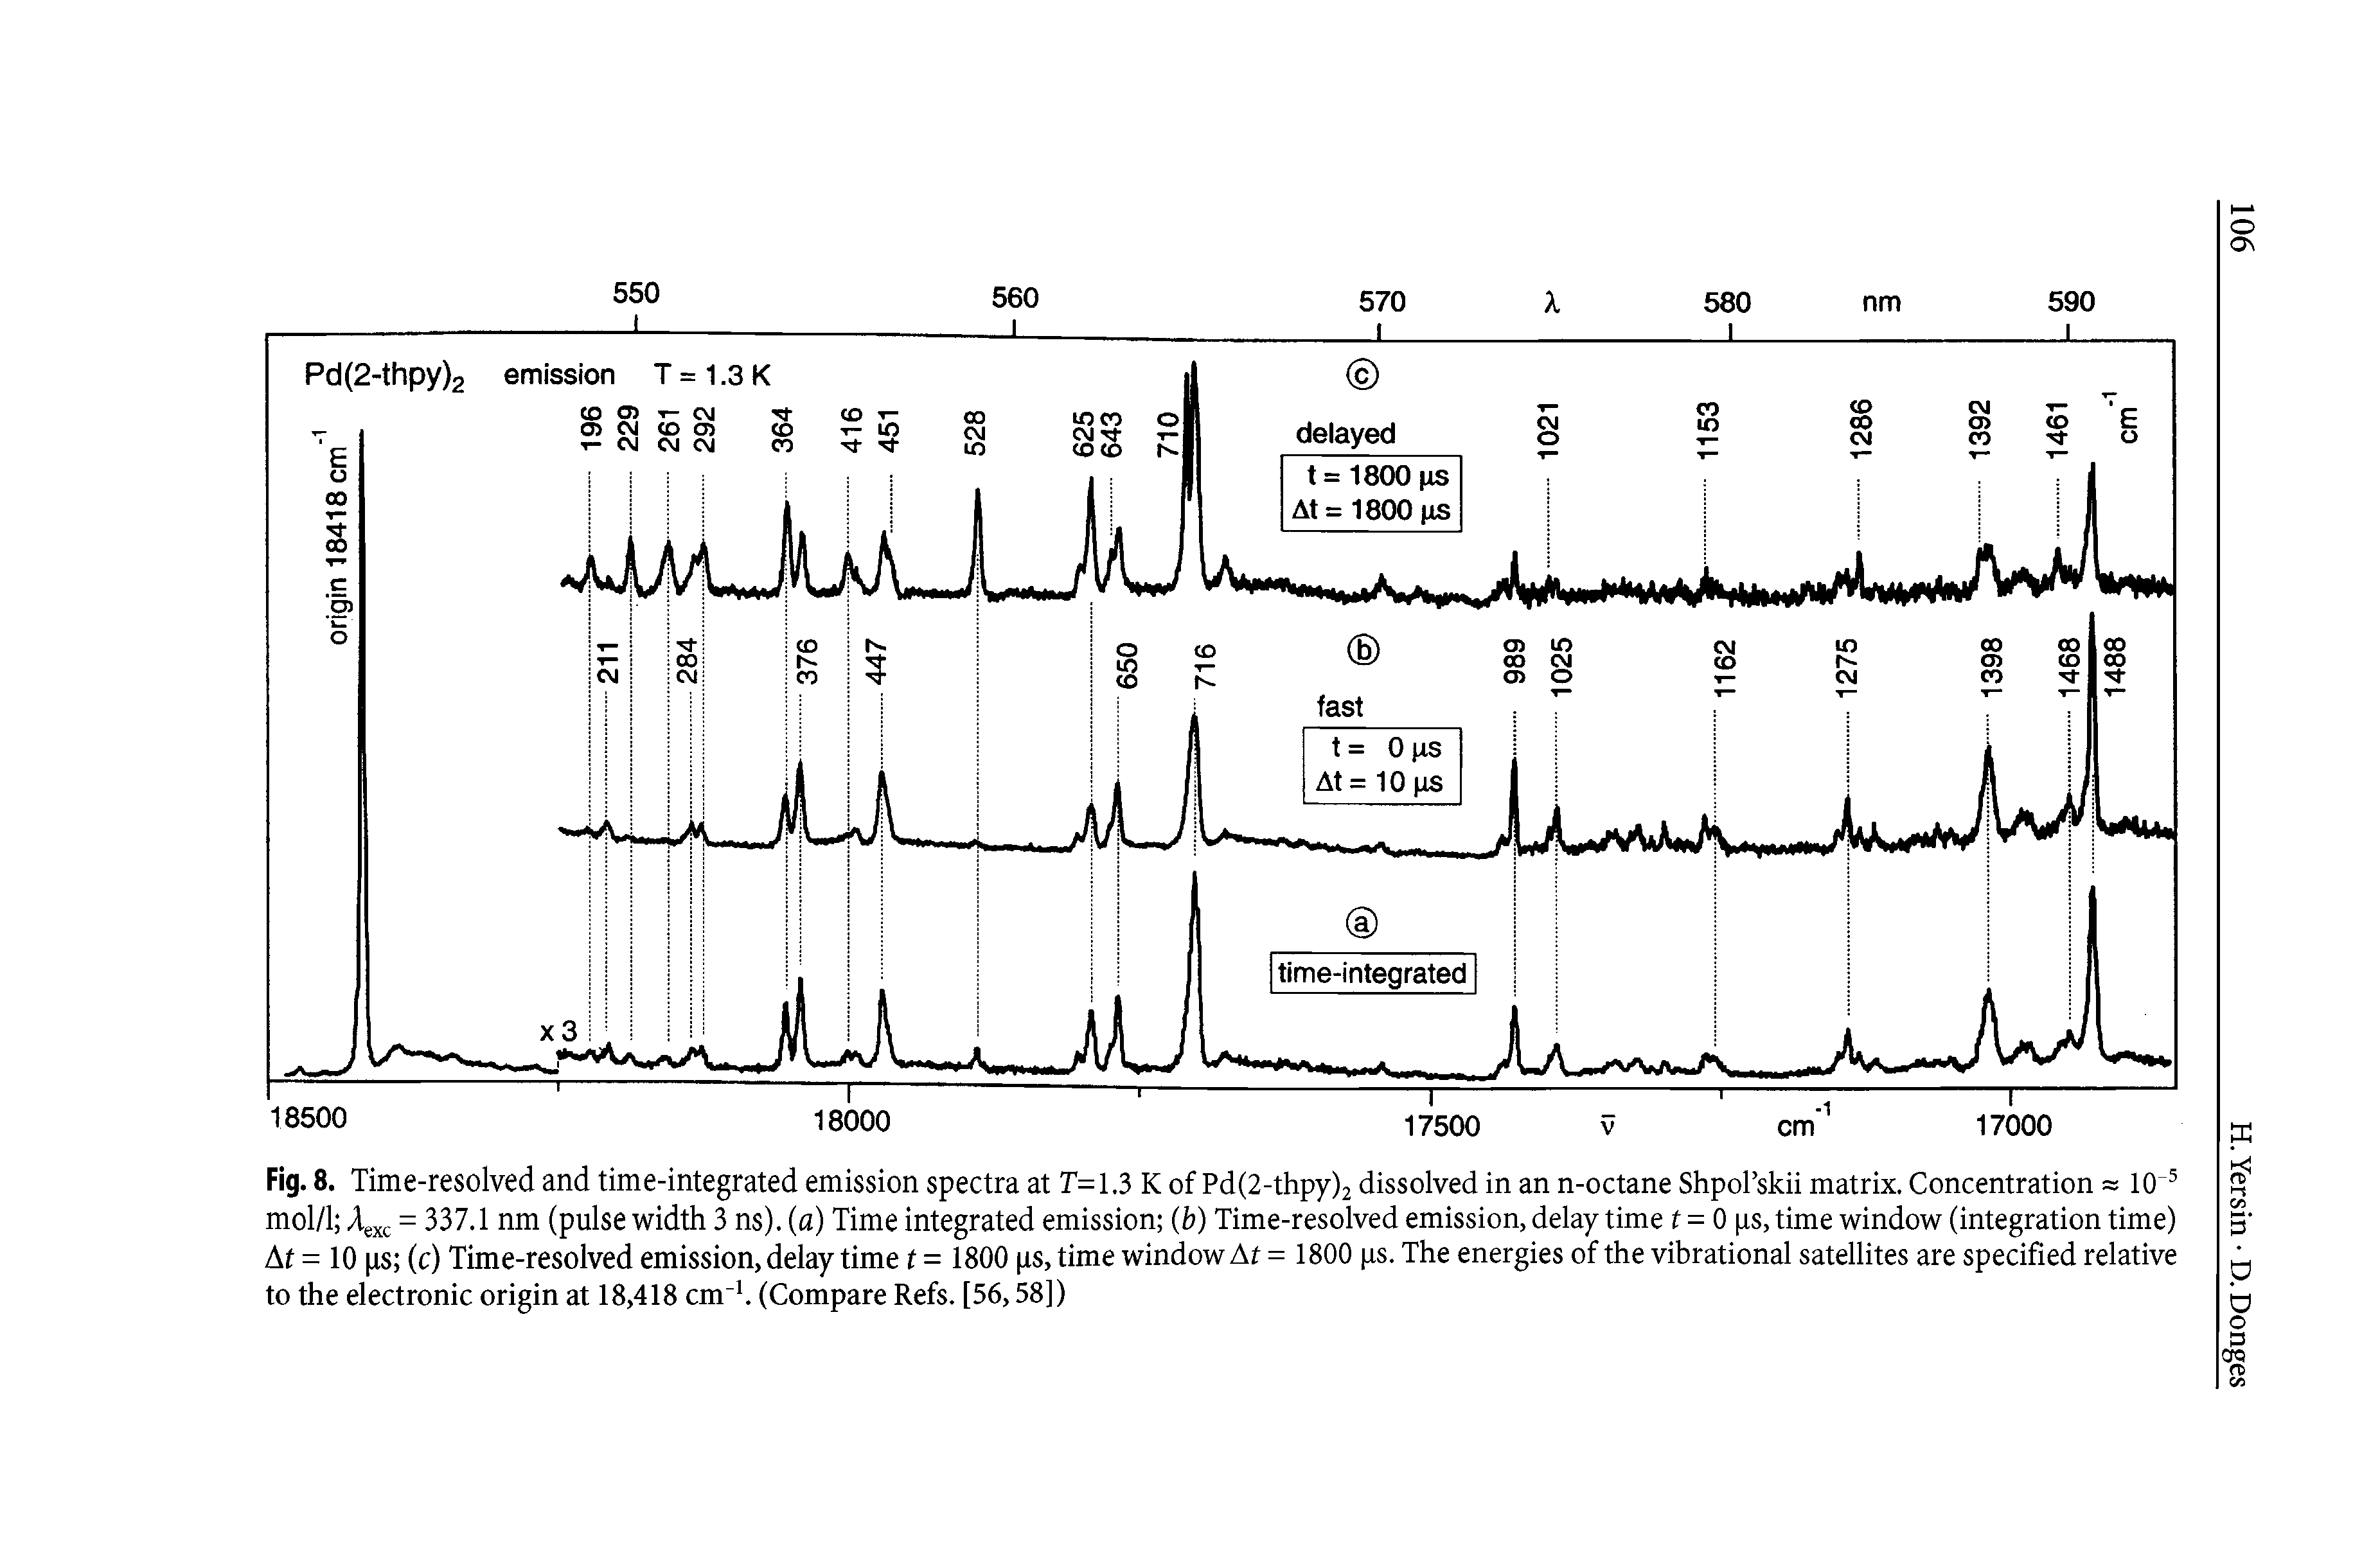 Fig. 8. Time-resolved and time-integrated emission spectra at T=1.3 K of Pd(2-thpy)2 dissolved in an n-octane ShpoTskii matrix. Concentration = 10 mol/1 Agxc = 337.1 nm (pulse width 3 ns), (a) Time integrated emission (b) Time-resolved emission, delay time t = 0 ps,time window (integration time) At = 10 ps (c) Time-resolved emission, delay time t = 1800 ps, time window At = 1800 ps. The energies of the vibrational satellites are specified relative to the electronic origin at 18,418 cm. (Compare Refs. [56,58])...